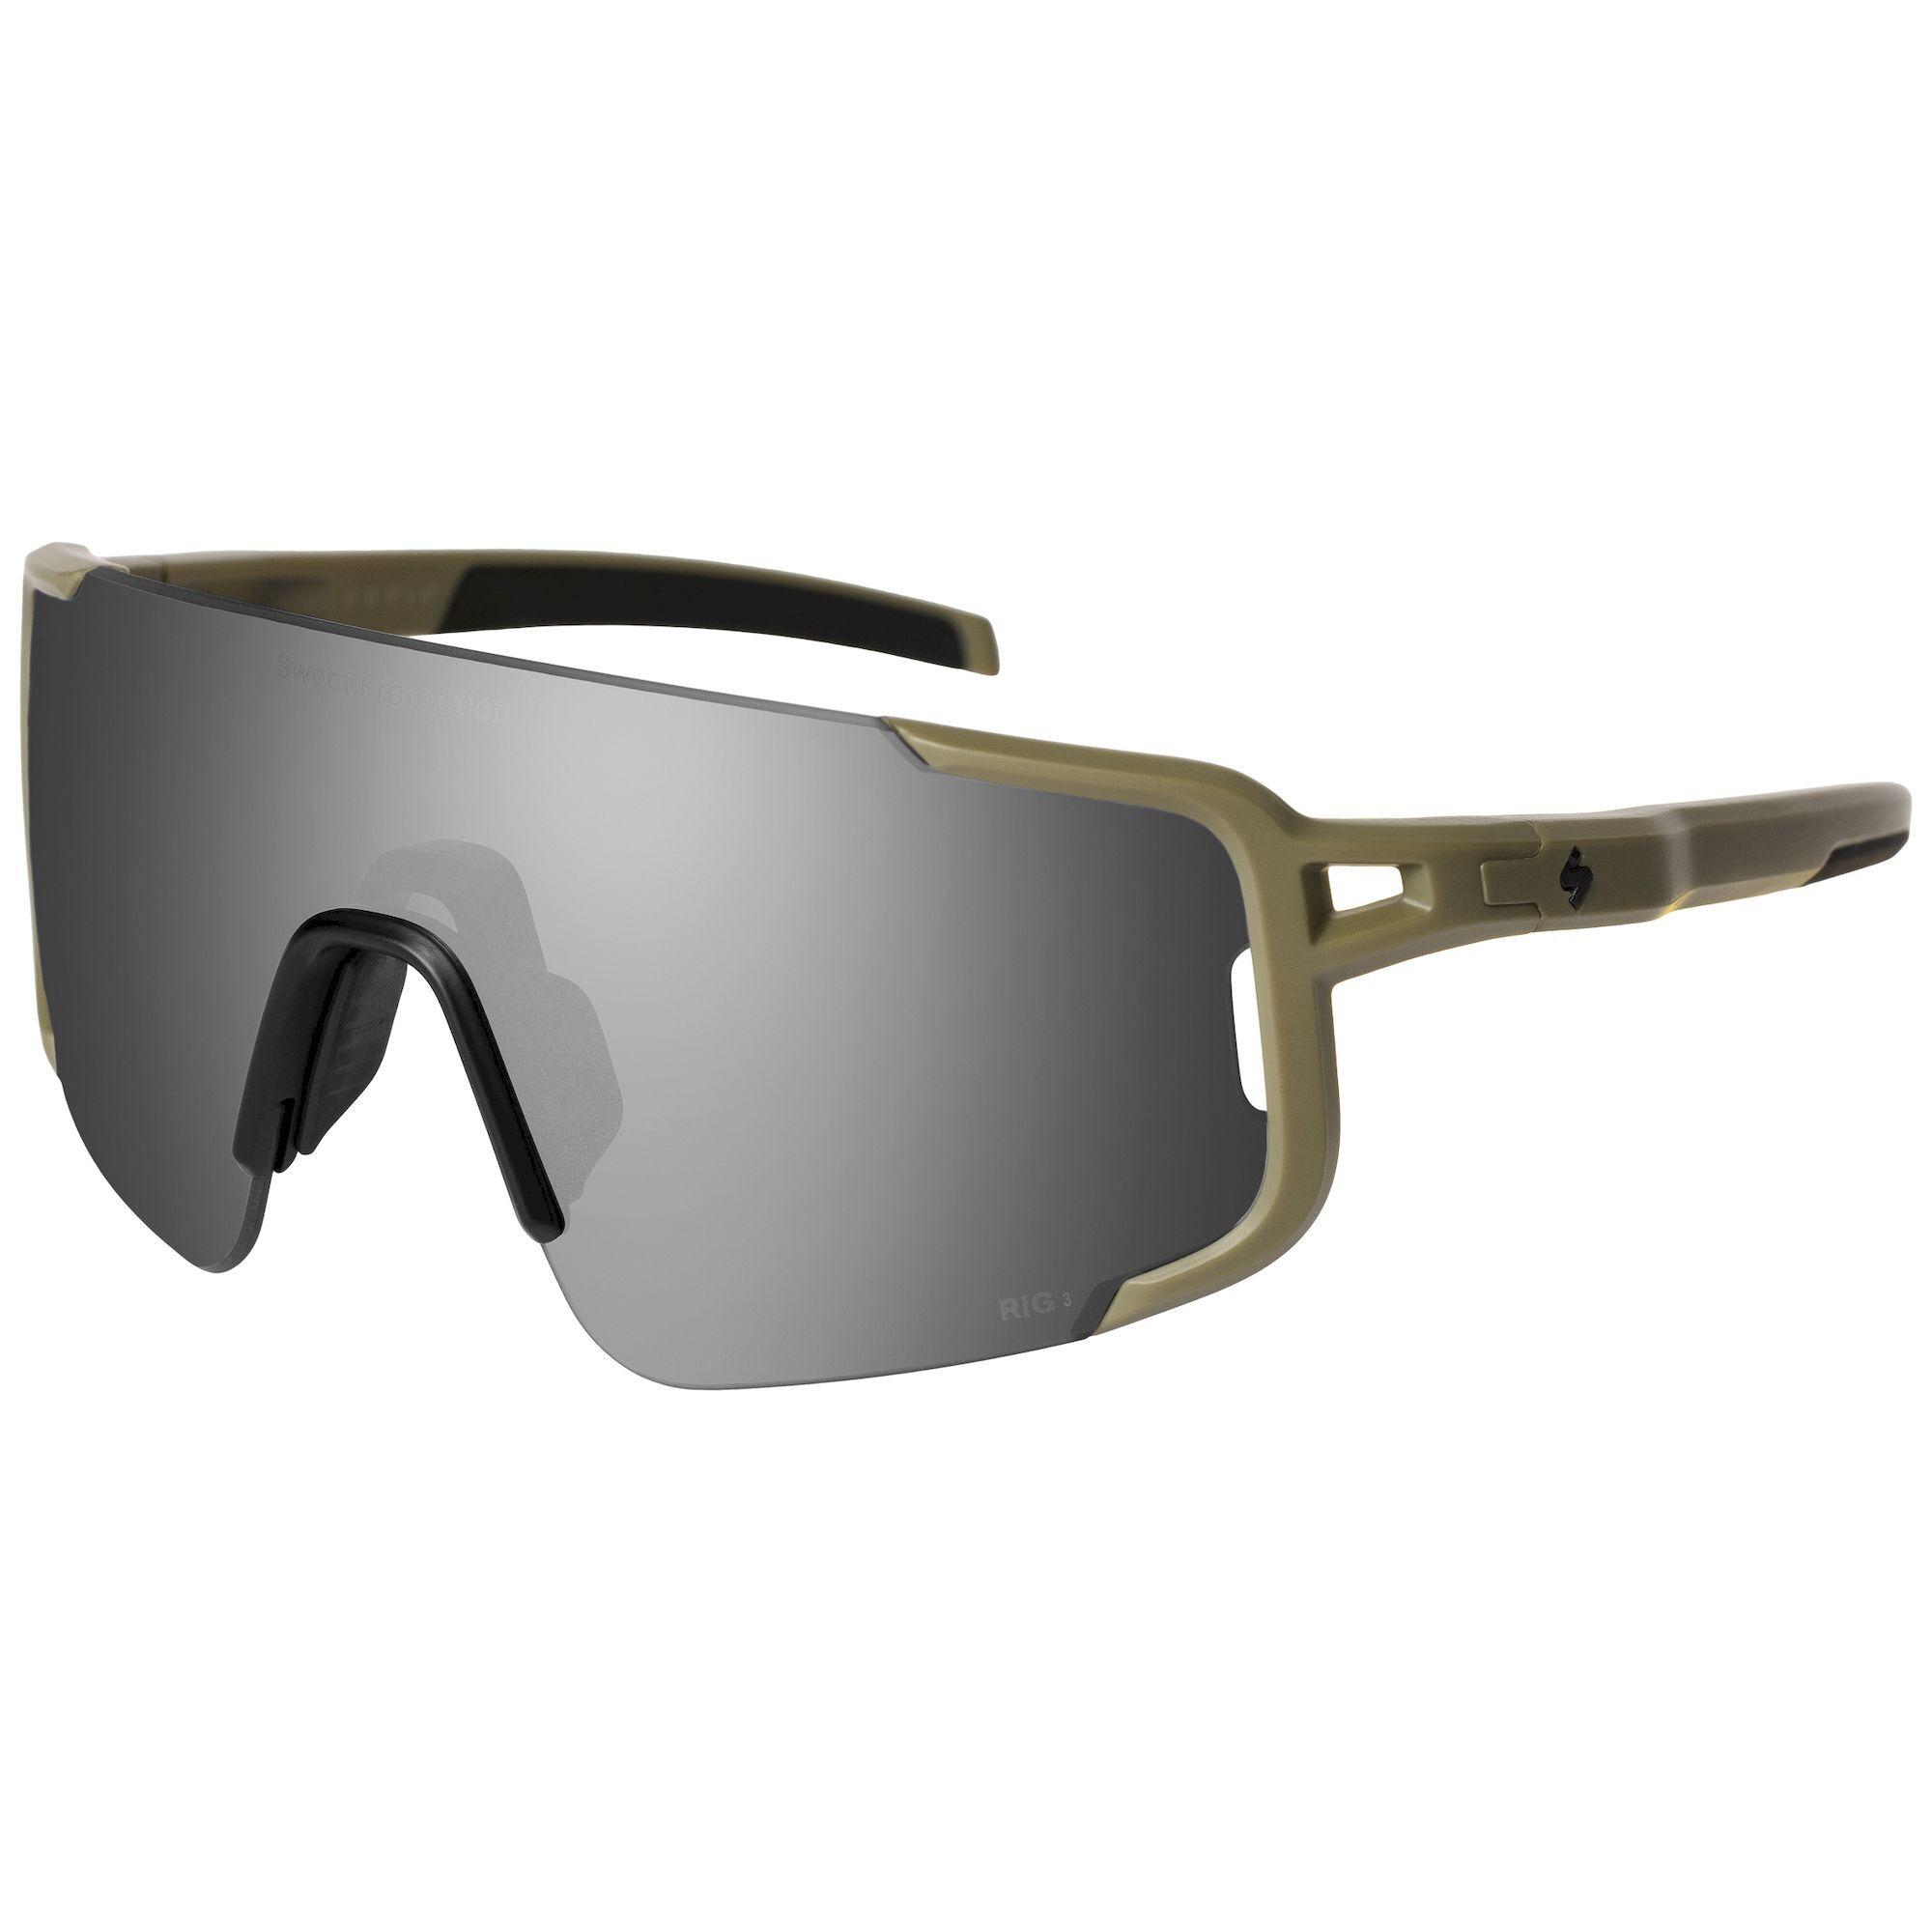 Sweet Protection Ronin RIG Reflect - Lunettes vélo homme | Hardloop